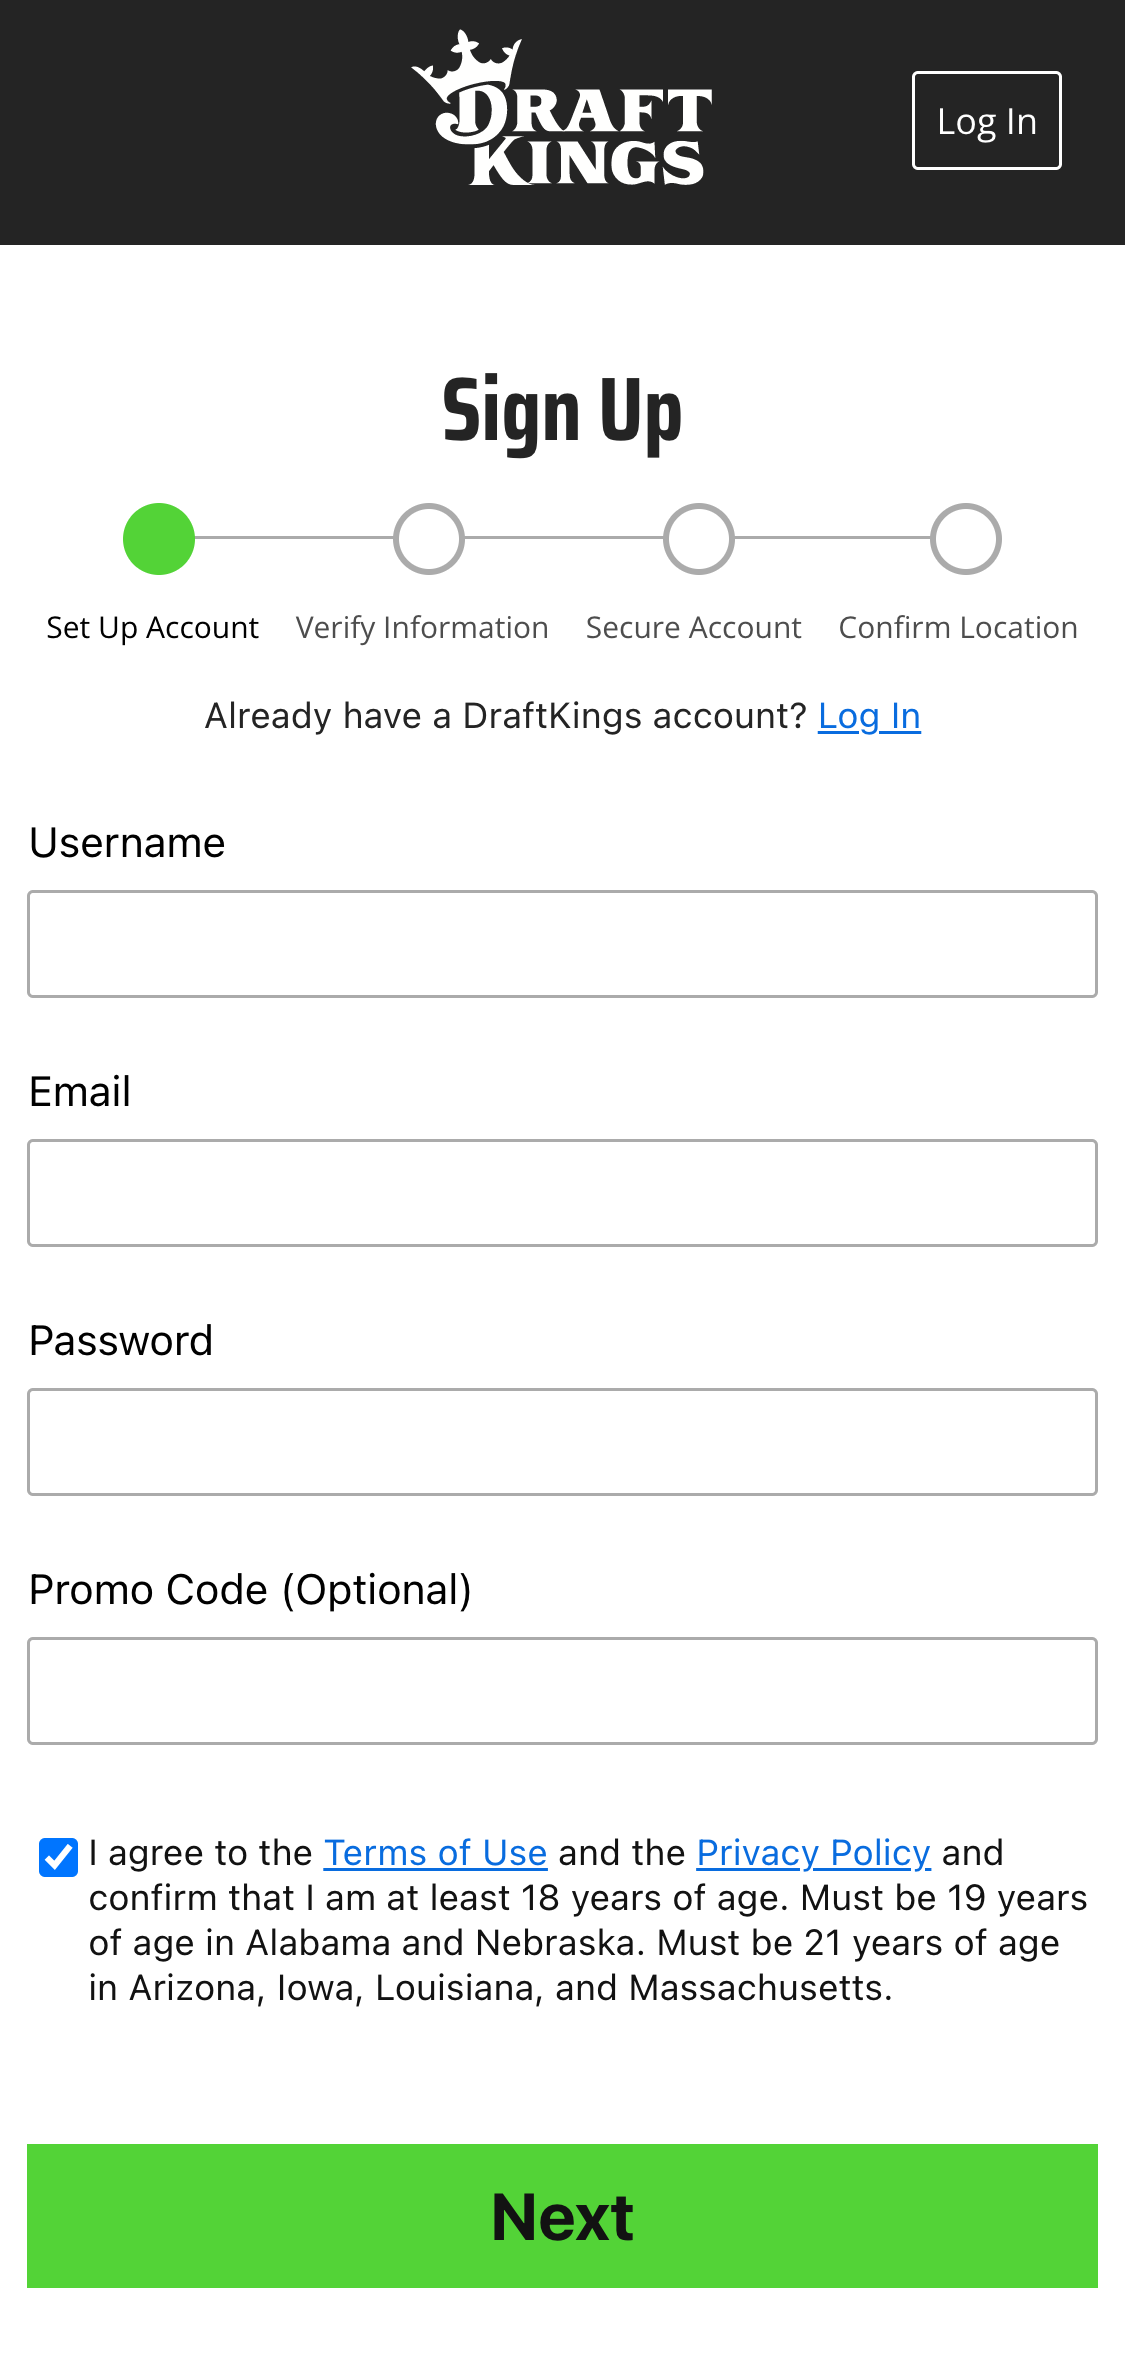 Signing up with DraftKings Sportsbook NY